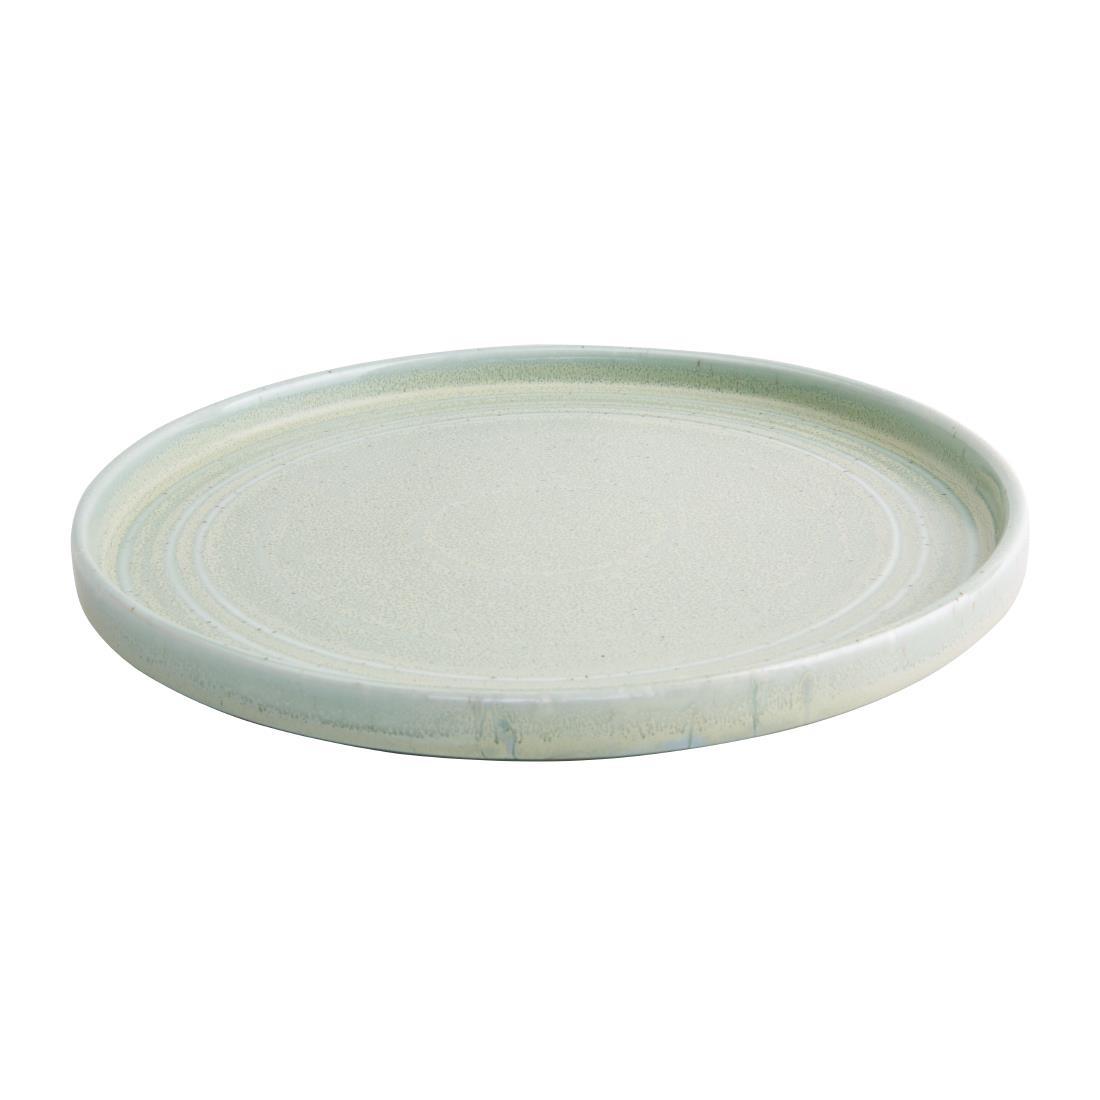 Olympia Cavolo Flat Round Plates Spring Green 270mm (Pack of 4) - FB564  - 2